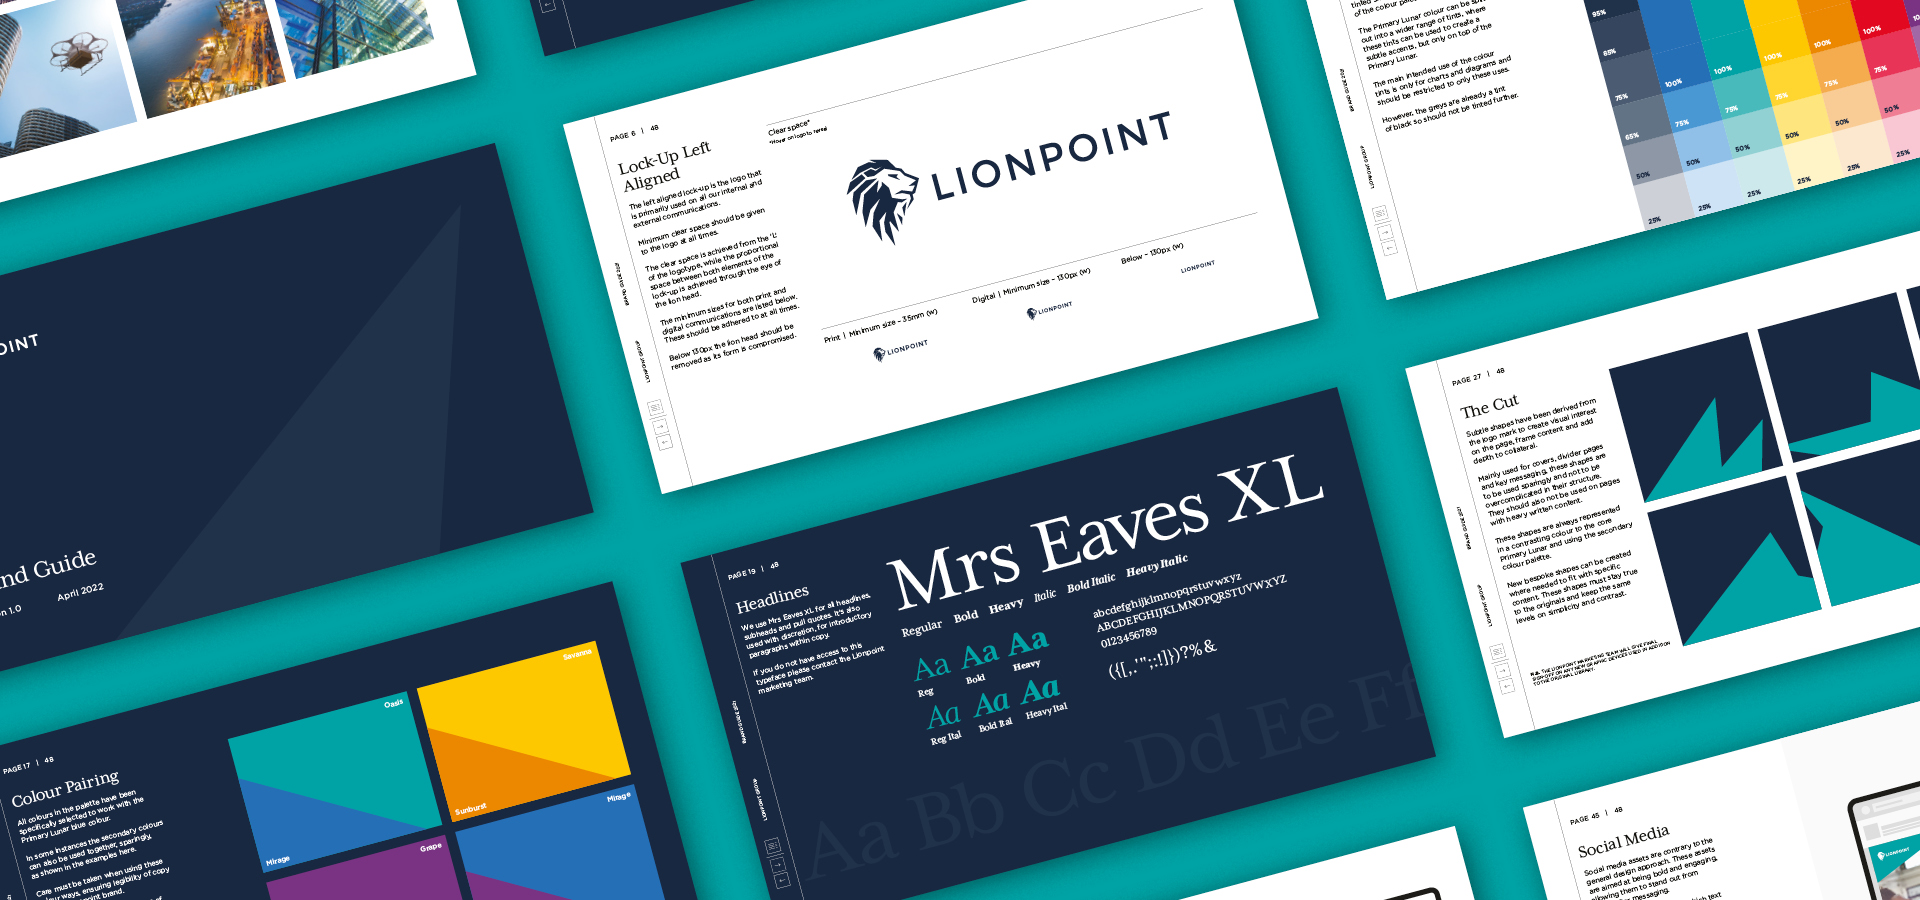 Pages from Lionpoint brand guidelines laid out in a grid.